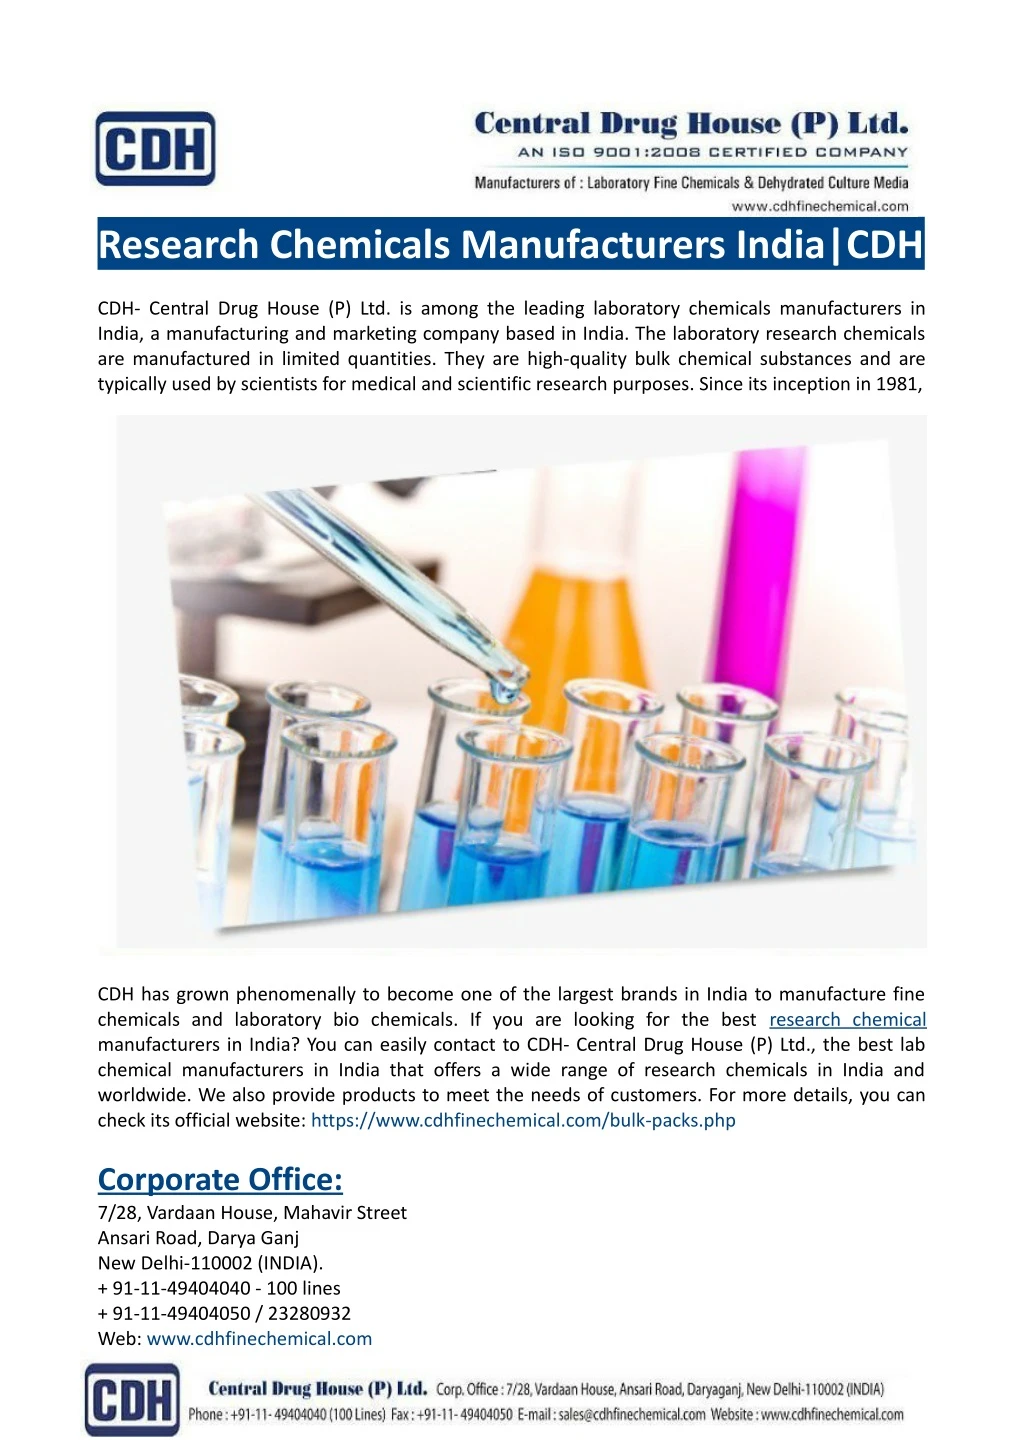 research chemicals manufacturers india cdh